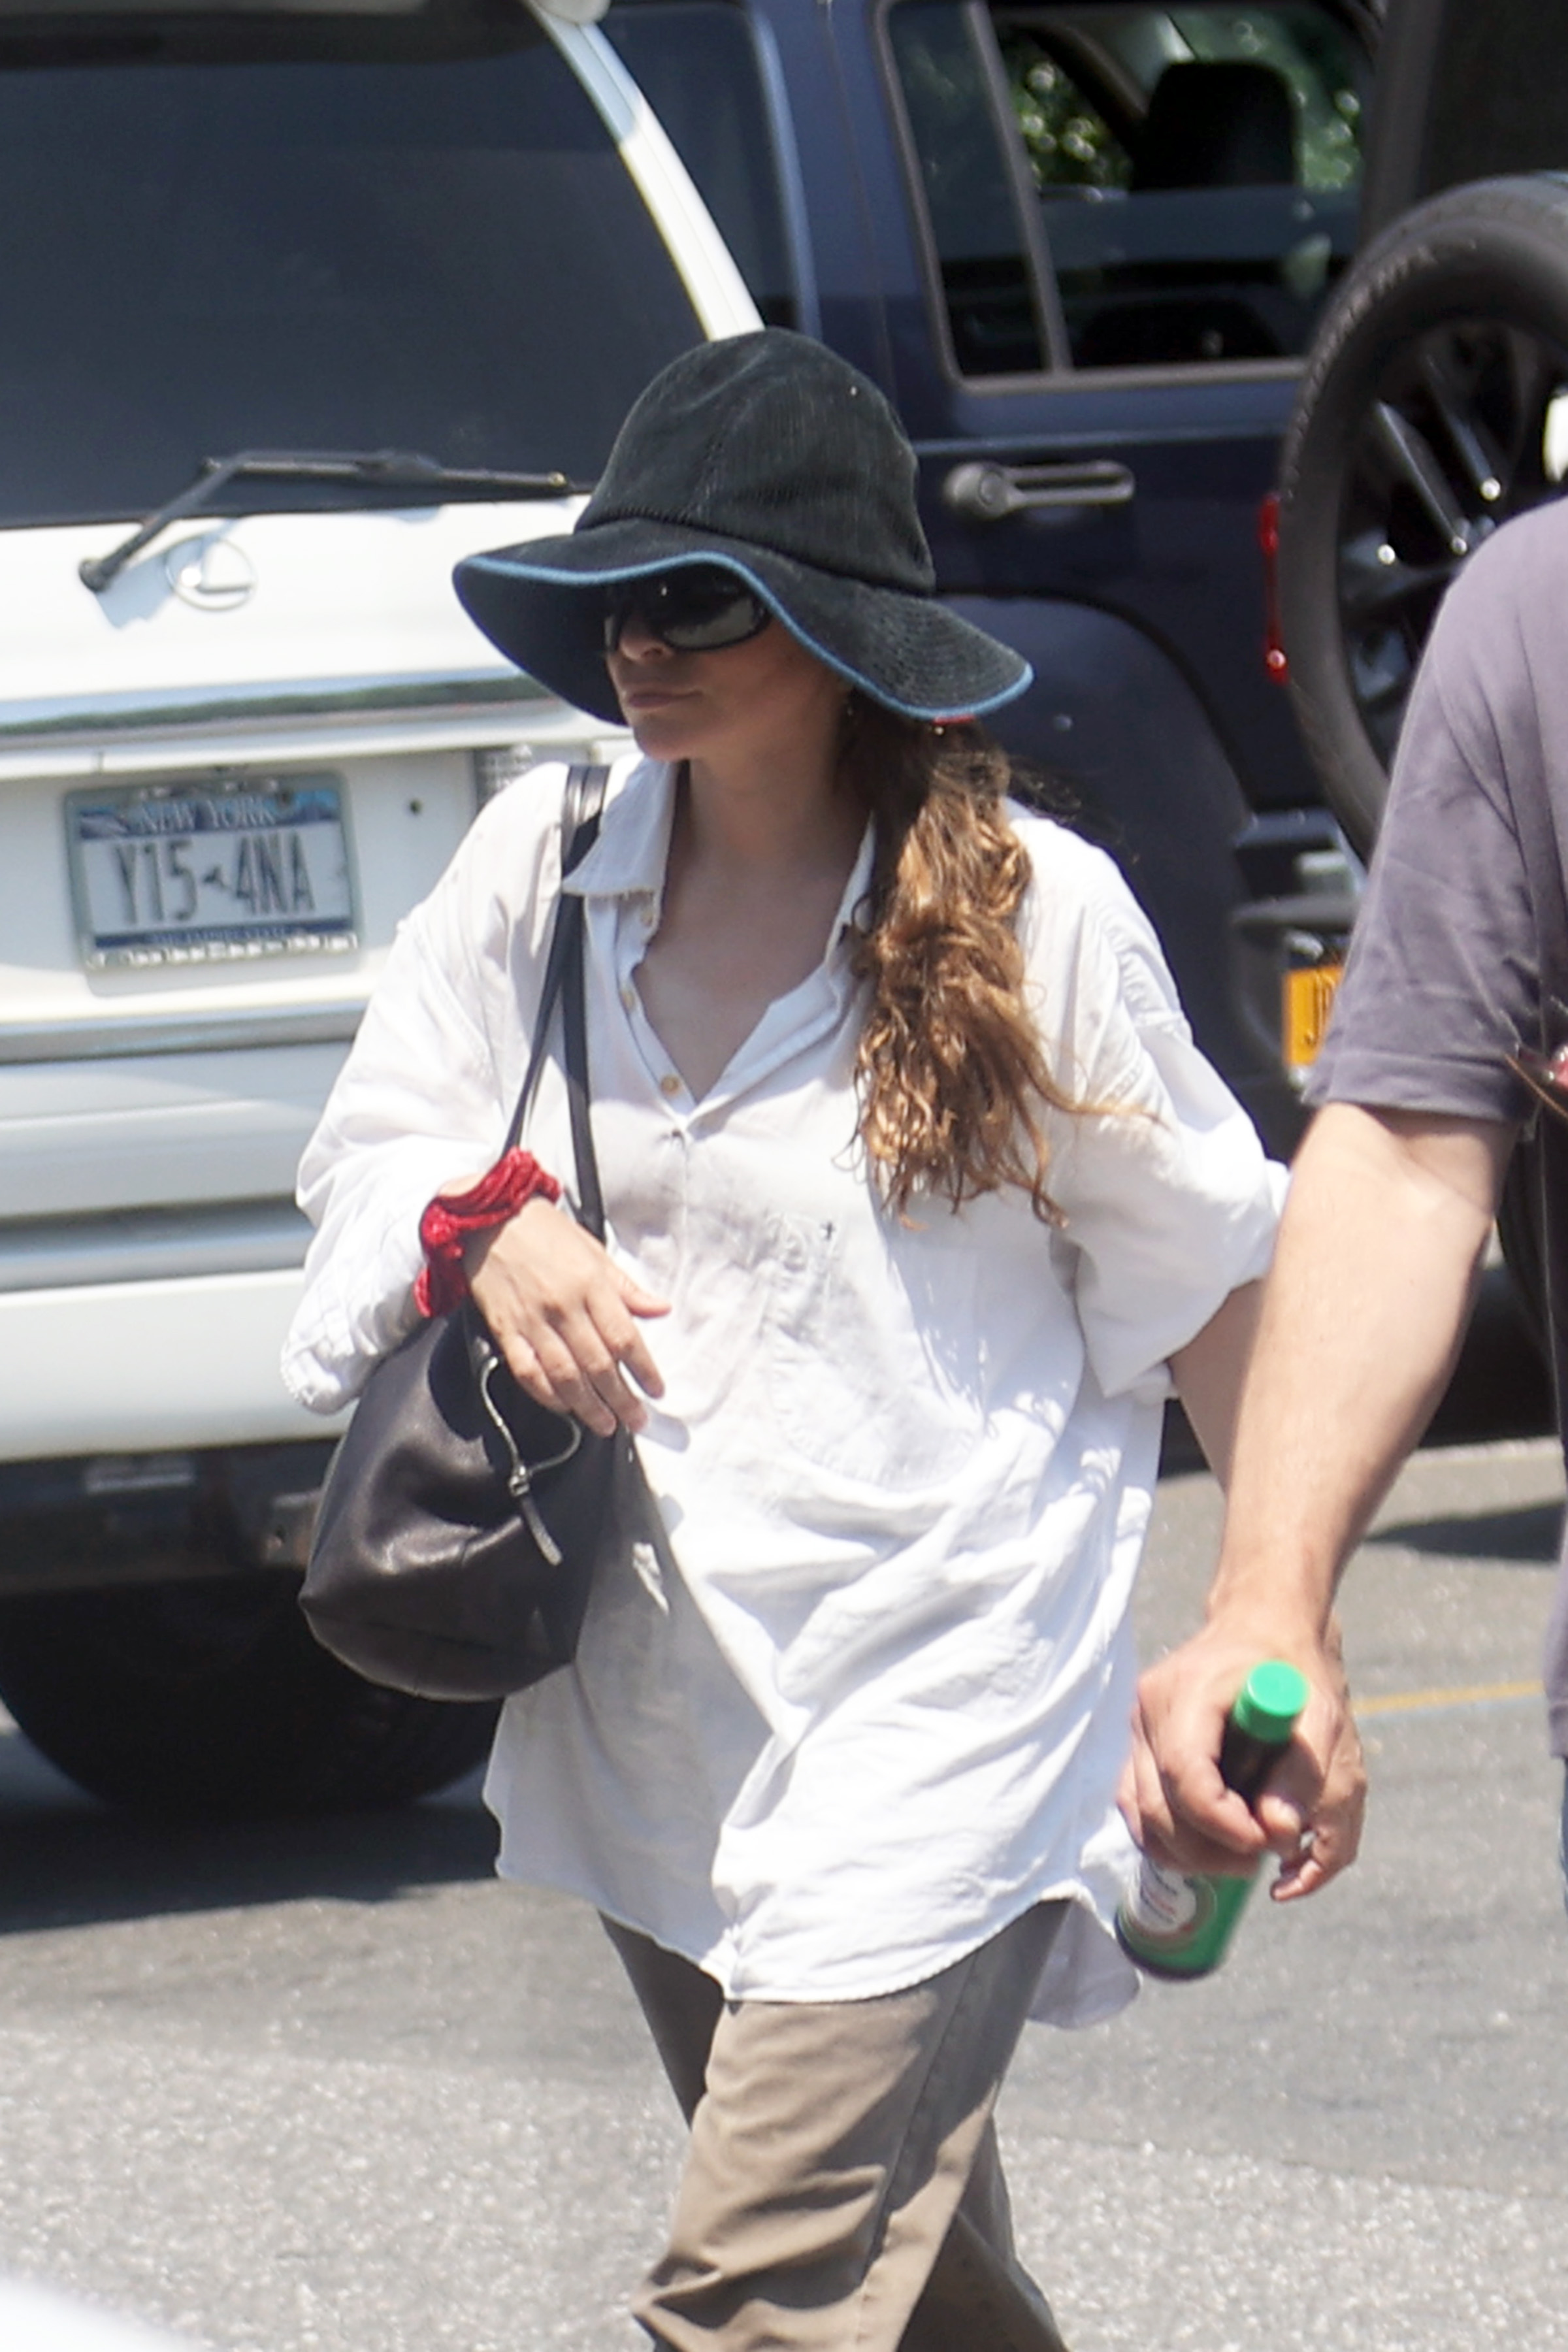 Ashley Olsen spotted in The Hamptons, New York over the weekend